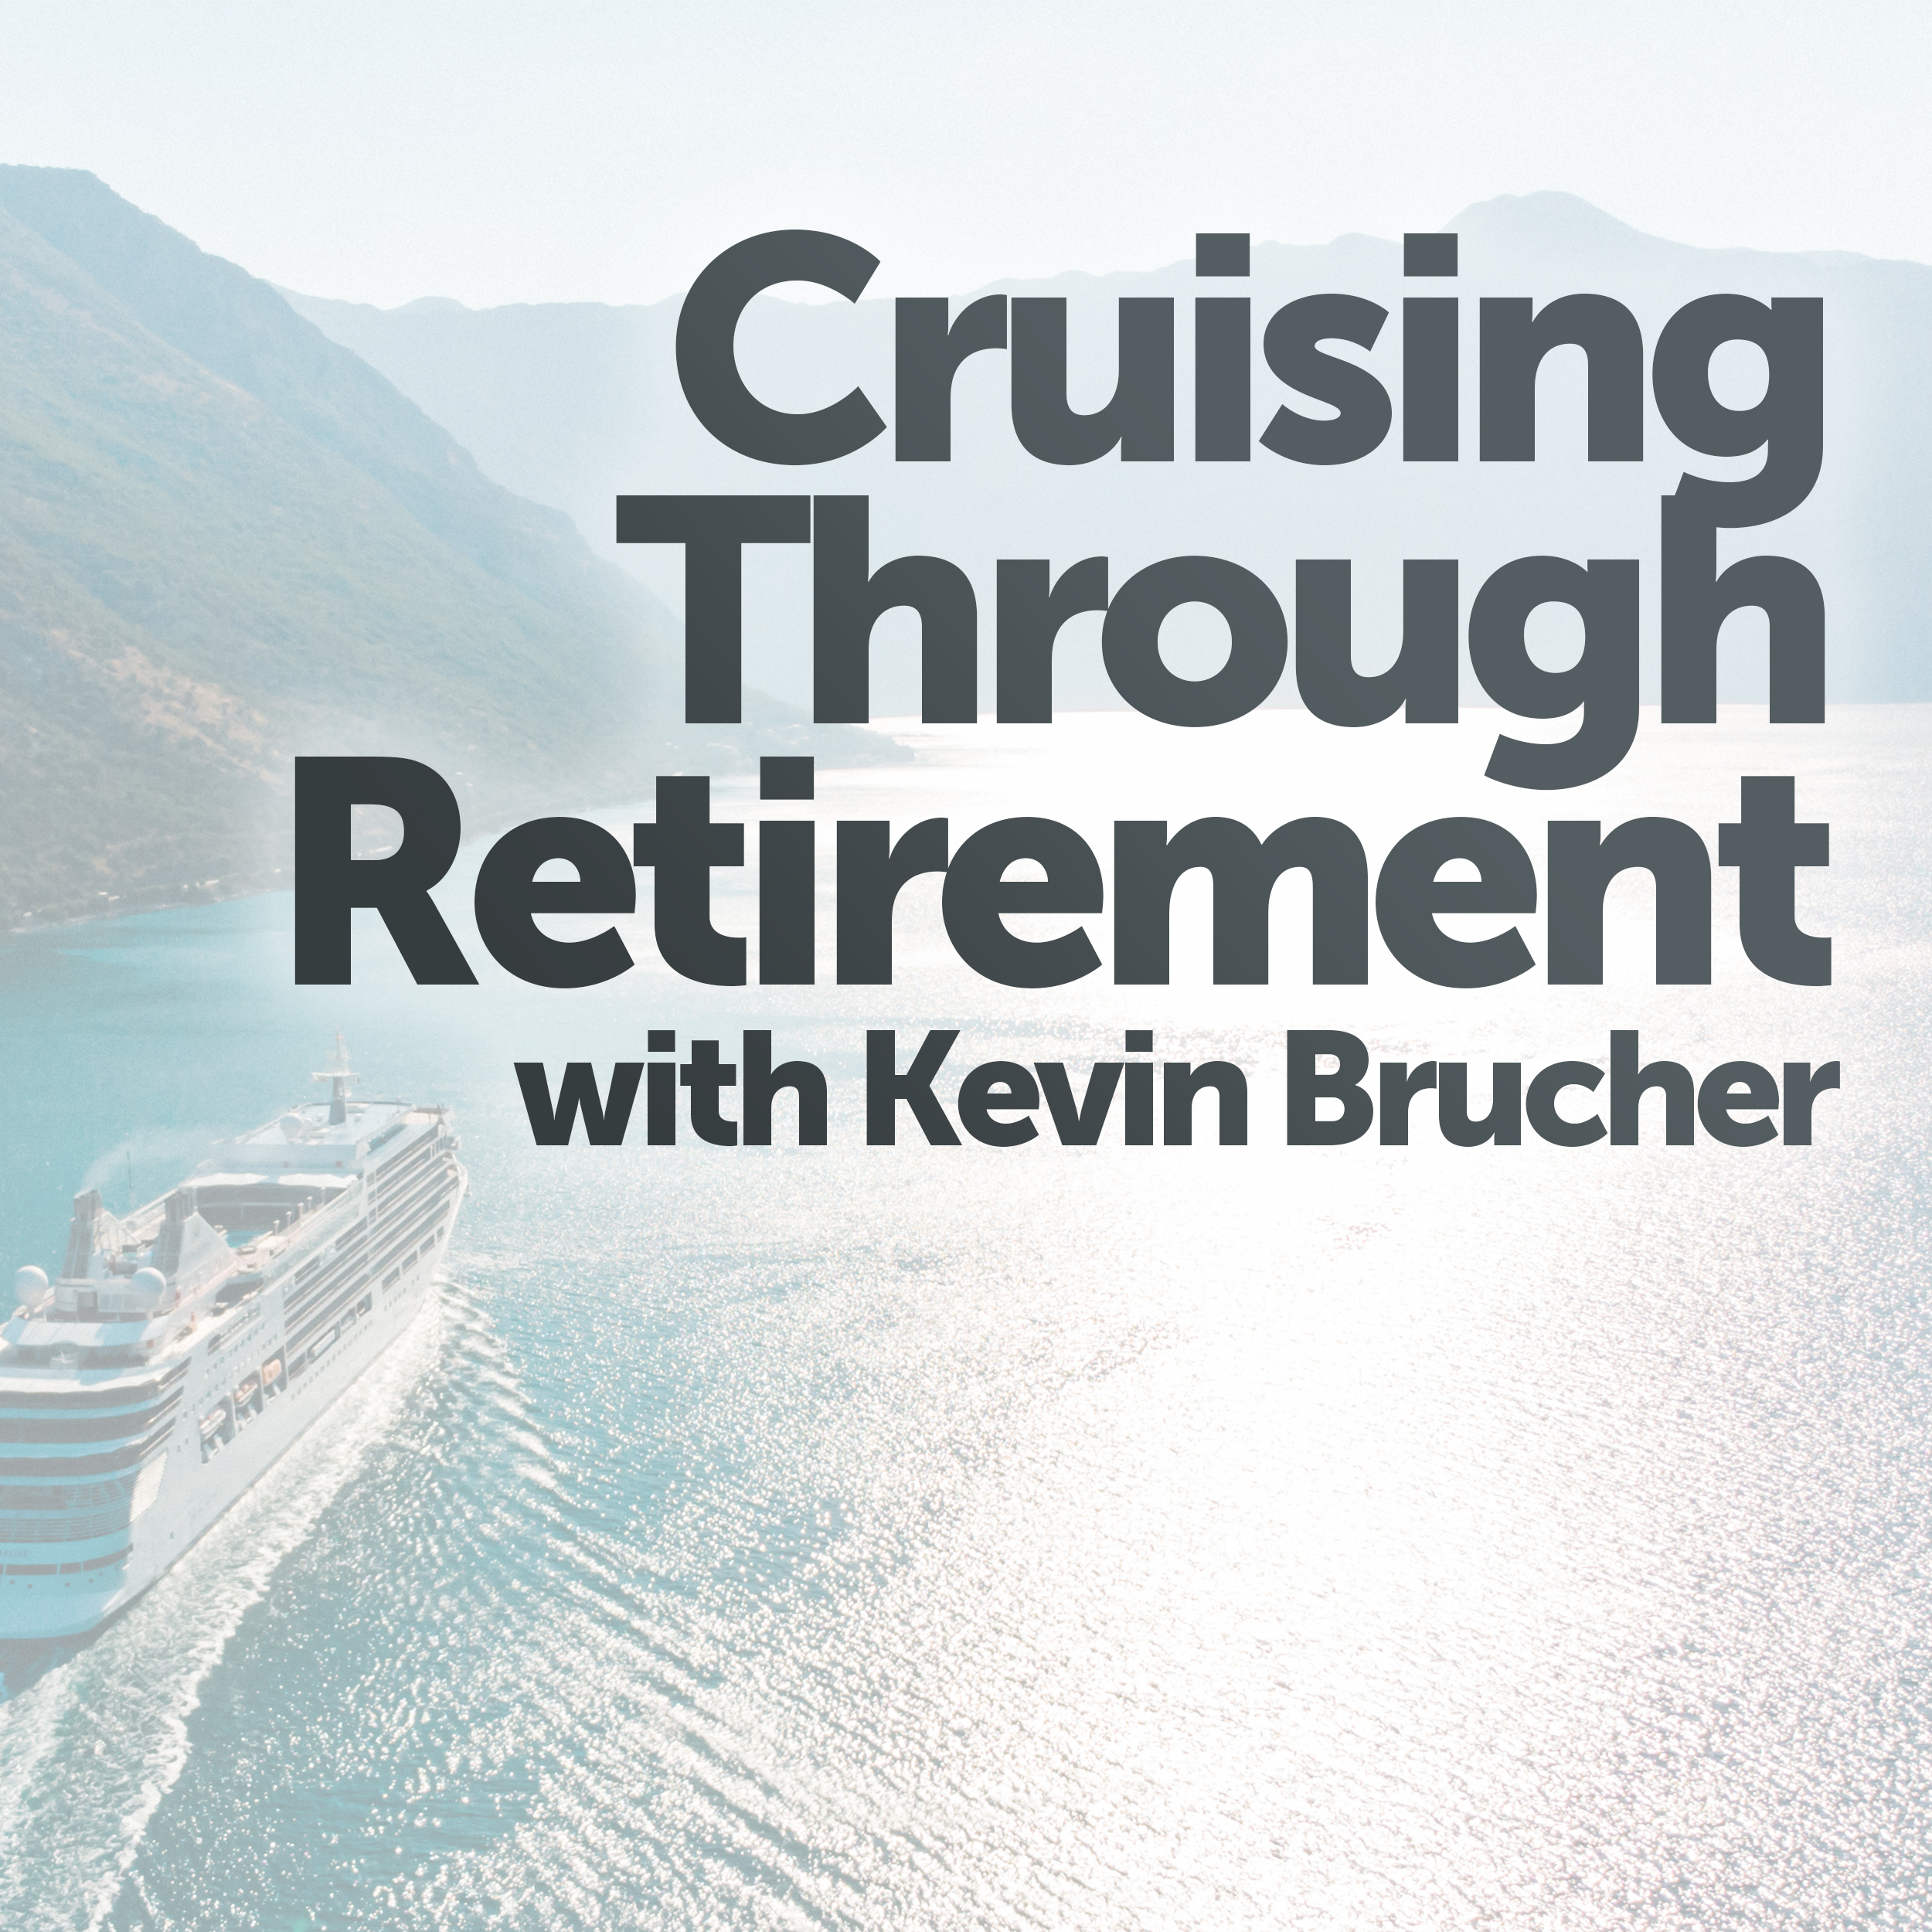 Kevin Brucher discusses the recent Federal Reserve meeting and its impact on the economy.